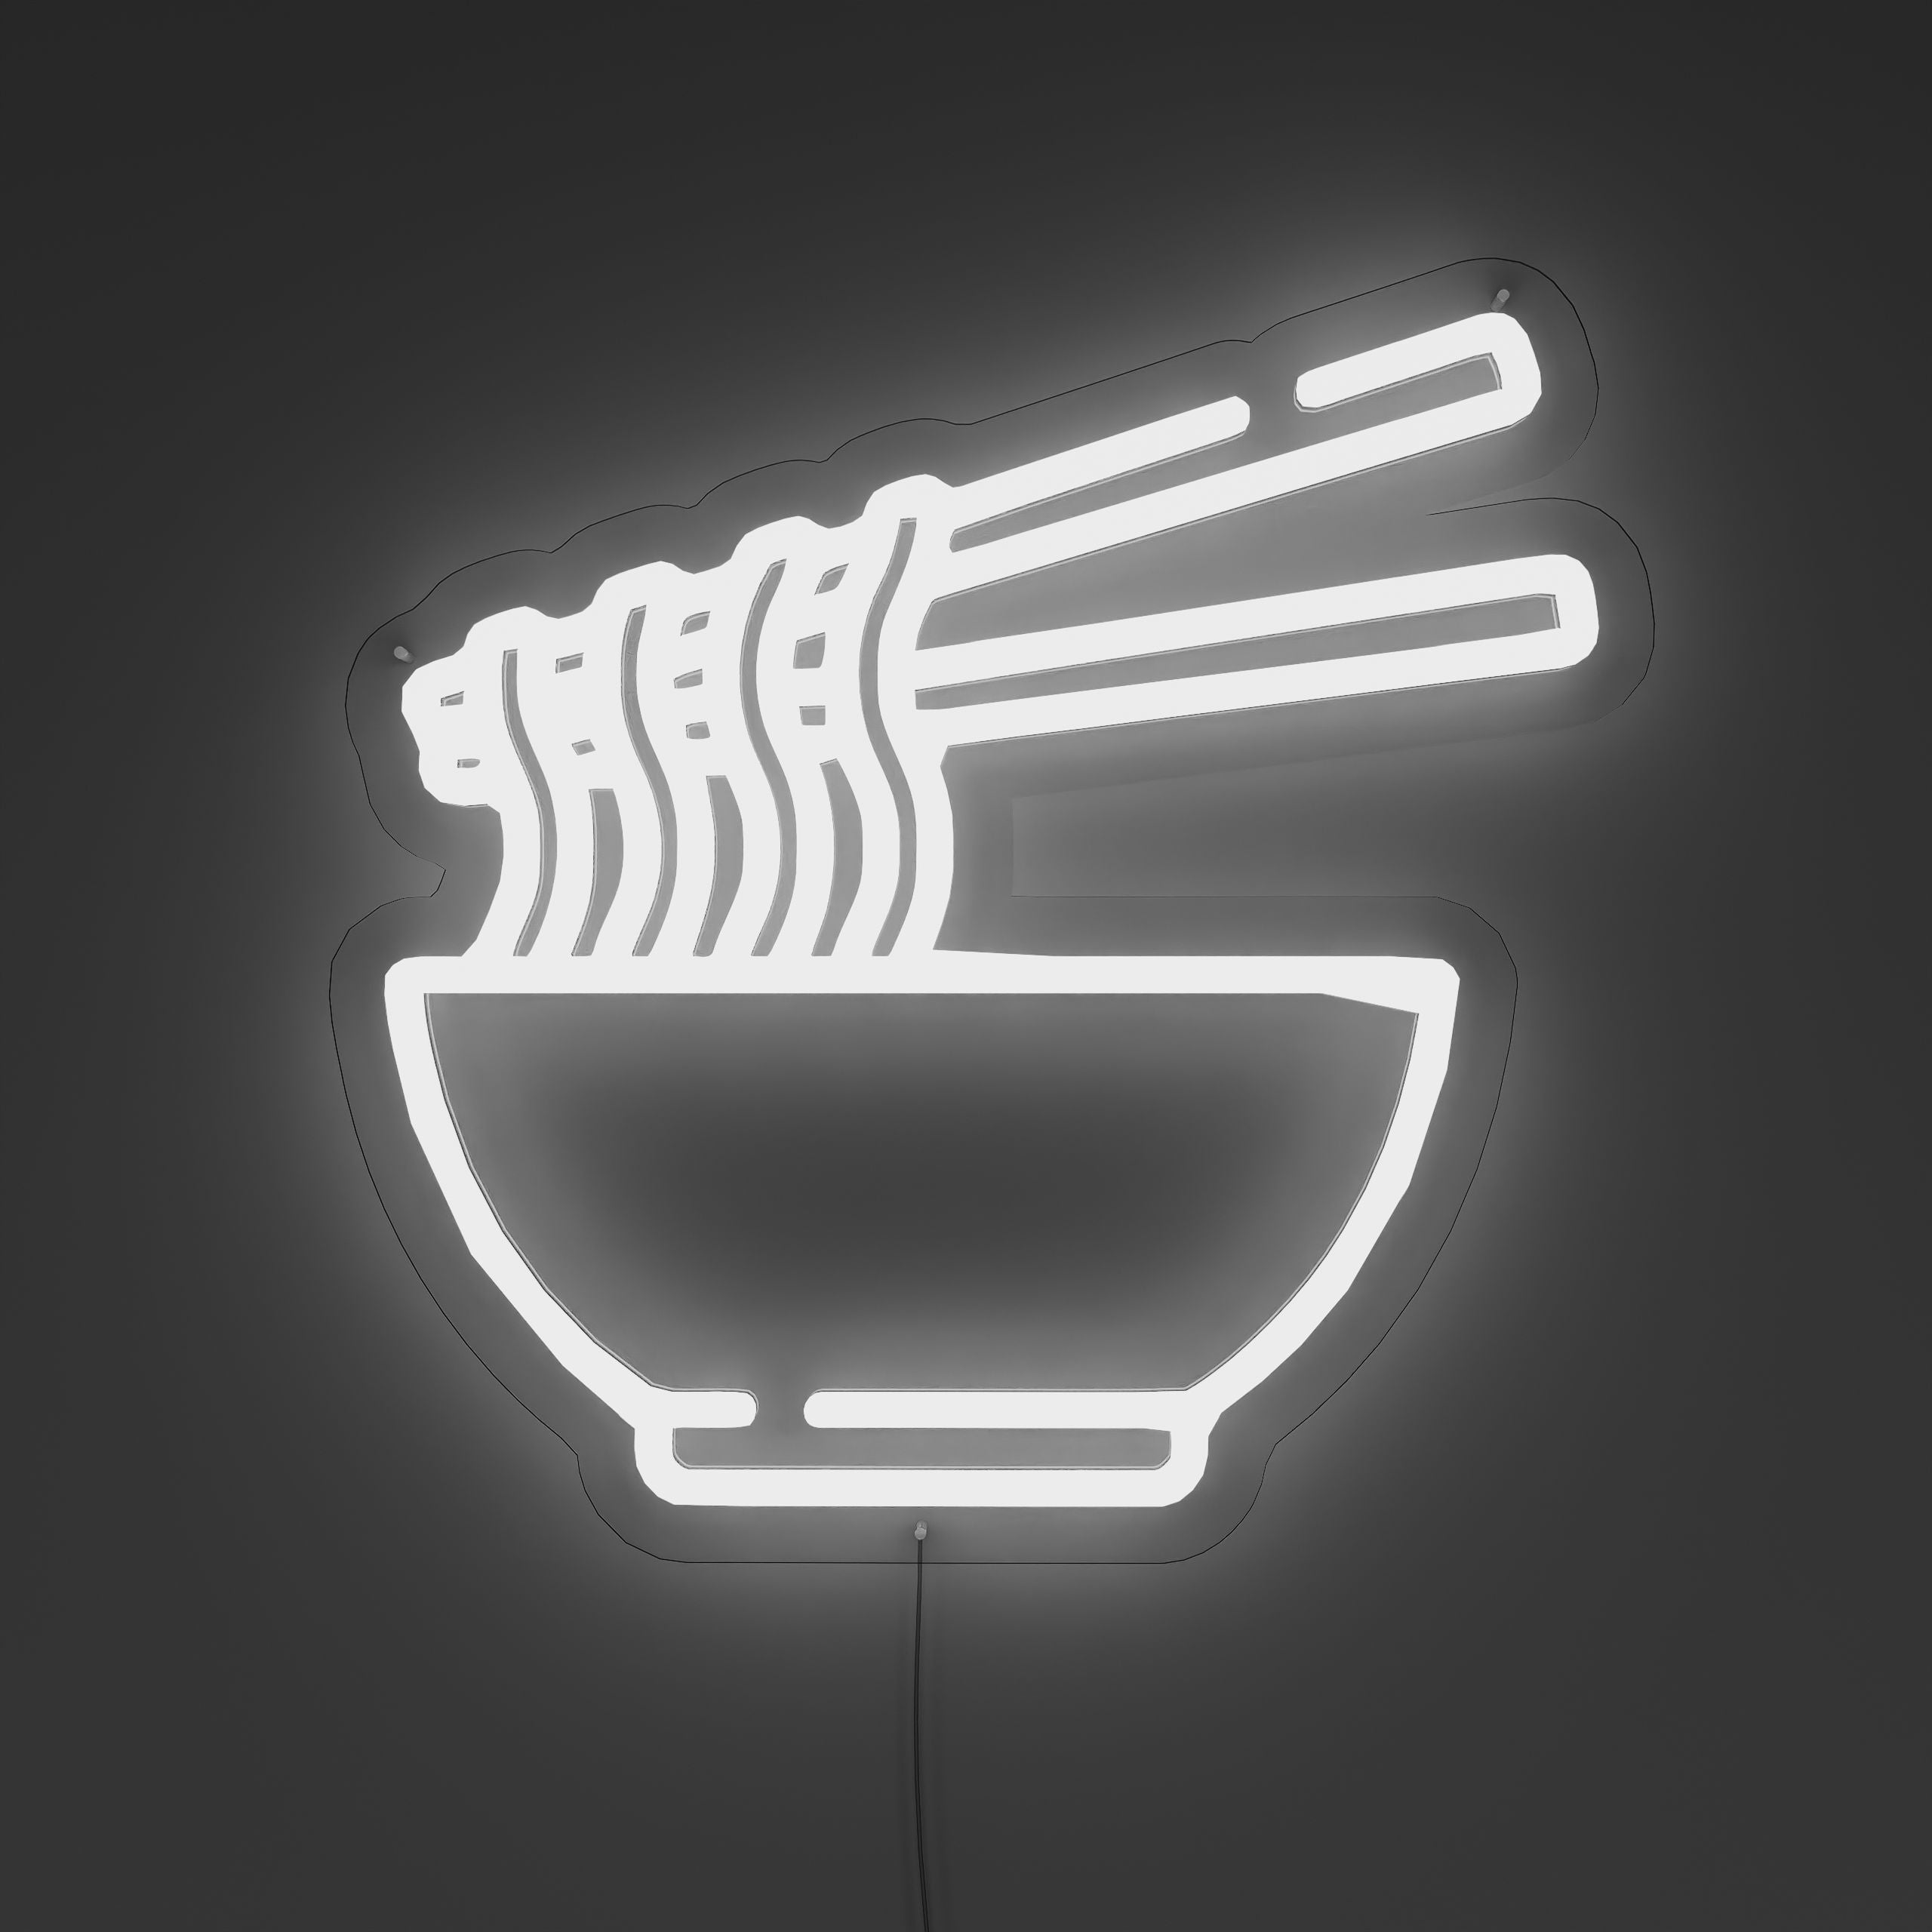 Hearty-Noodle-Meal-Neon-Sign-Lite